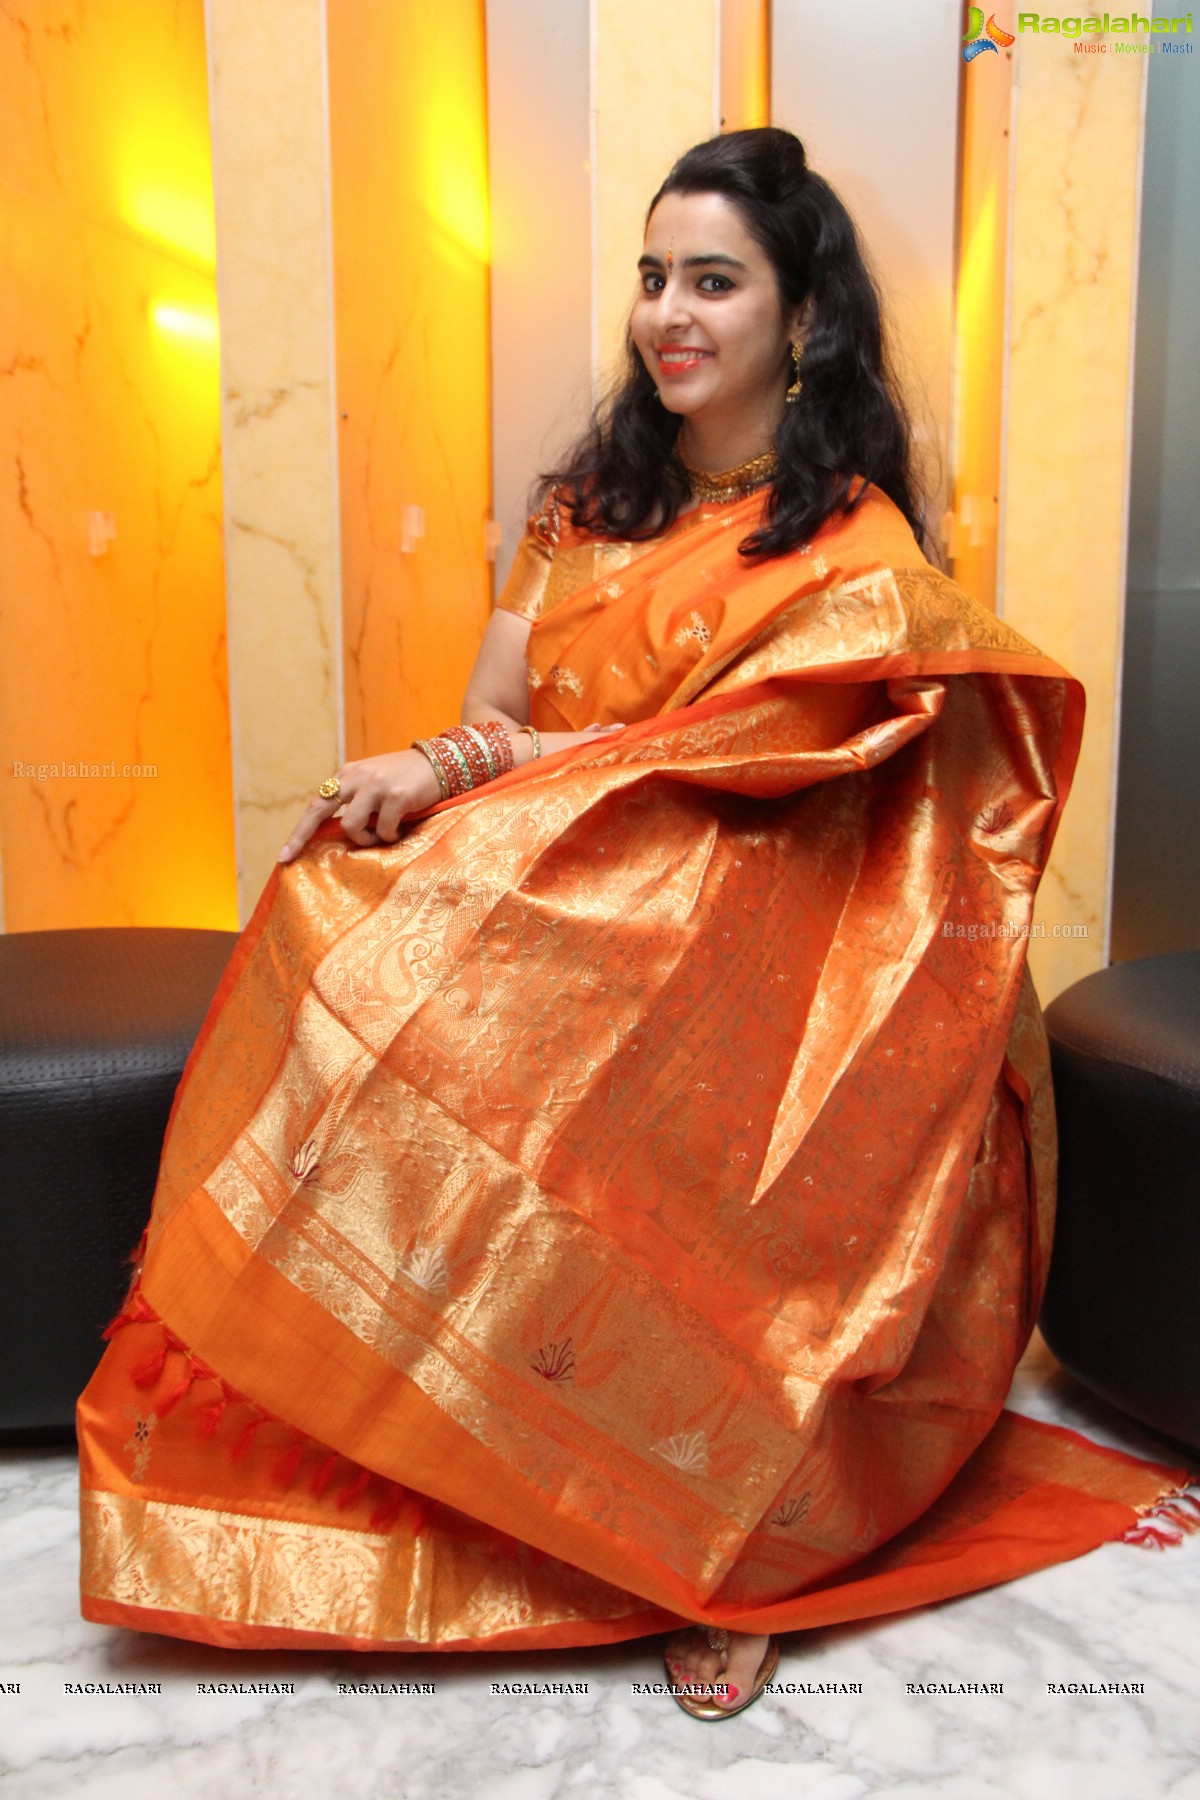 South Indian Theme Event by Pink Ladies Club, Hyderabad